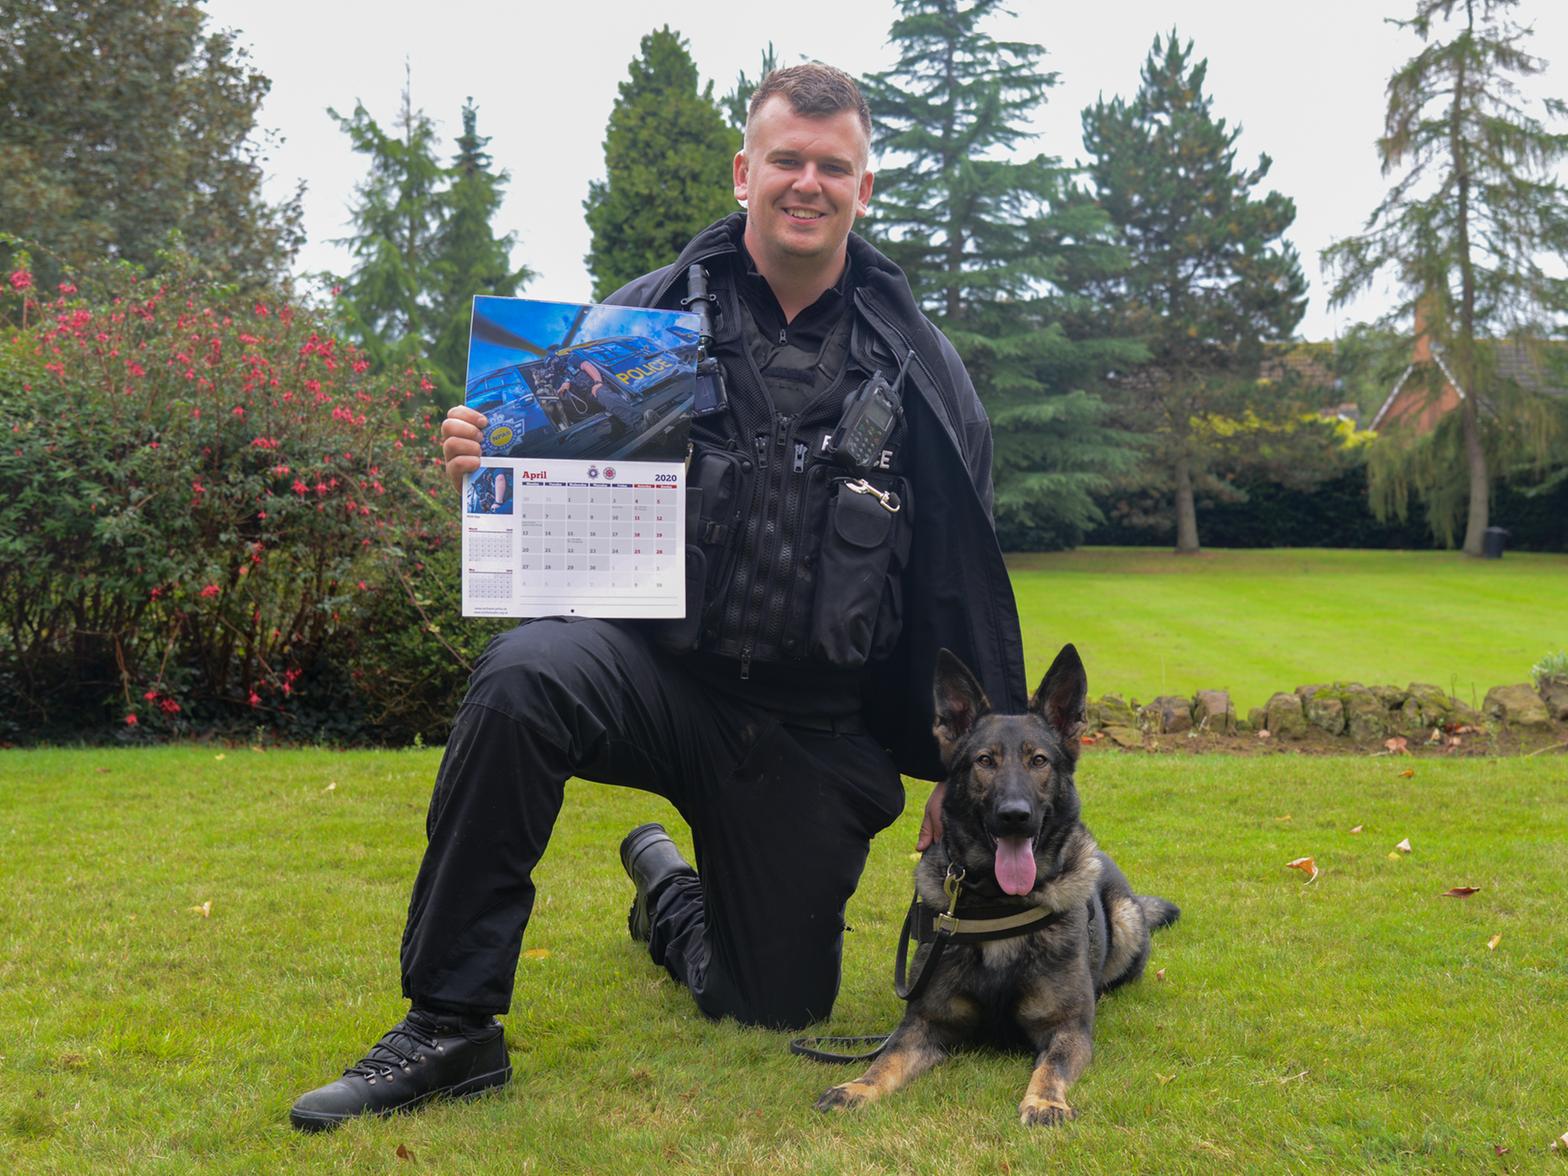 The charity also awards the National K-9 Memorial Medal, the first of its kind in the United Kingdom. It is presented to Police Dogs upon retirement, or in recognition of their bravery.